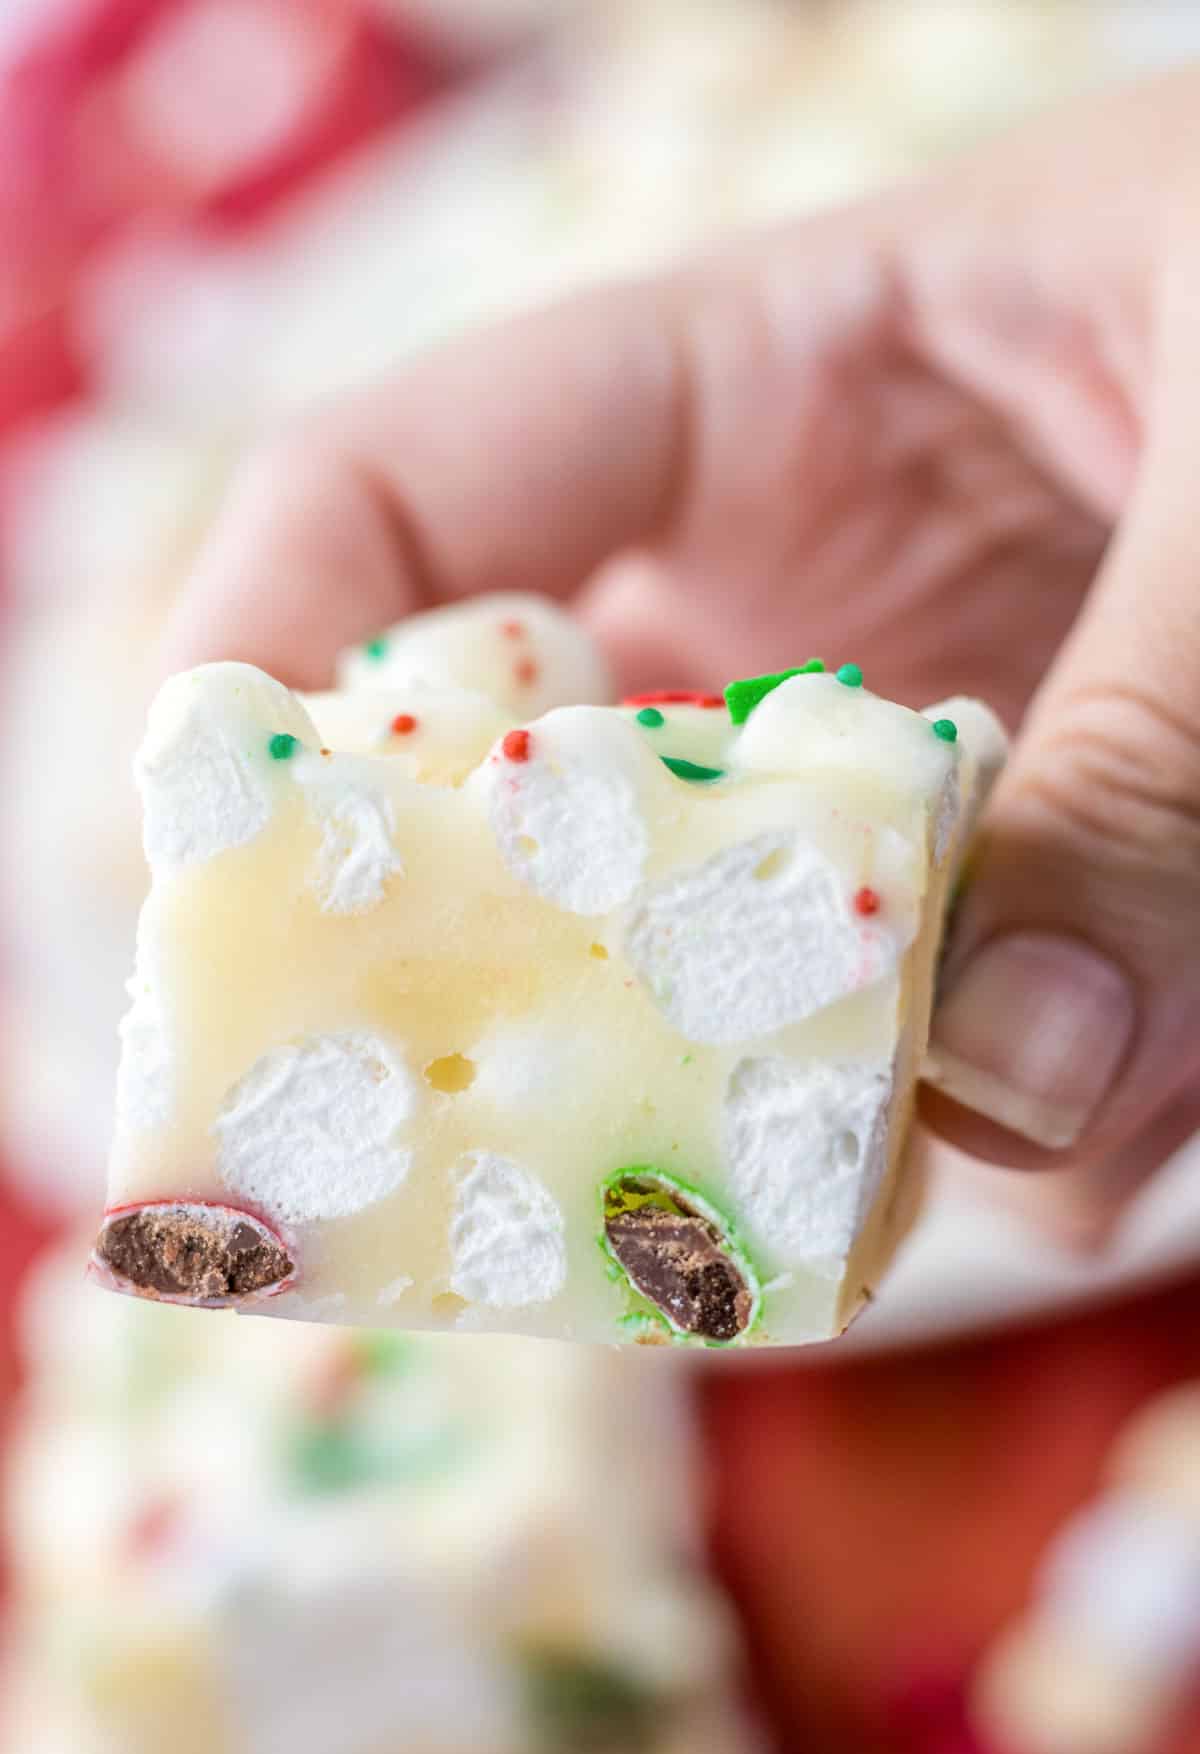 A person holding a piece of white chocolate rocky road showing marshmallows in it